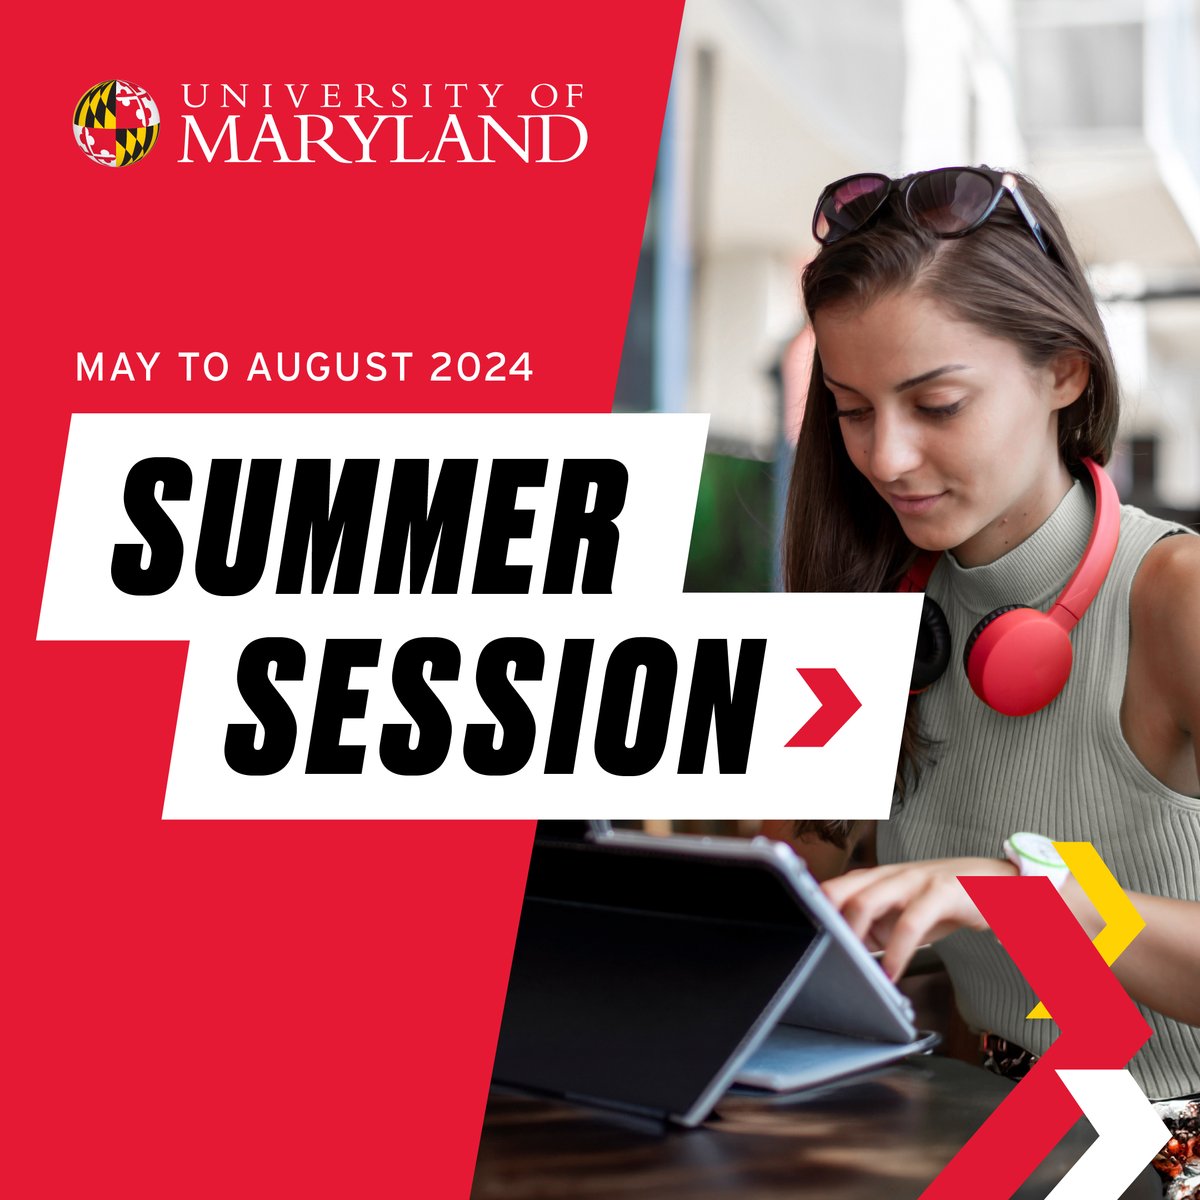 Don't forget: You can fulfill a major course requirement by registering for University of Maryland's Summer Session: May 28–August 16, 2024! 

Learn more and register today at summer.umd.edu #FearlesslyUMD #KeepLearningUMD